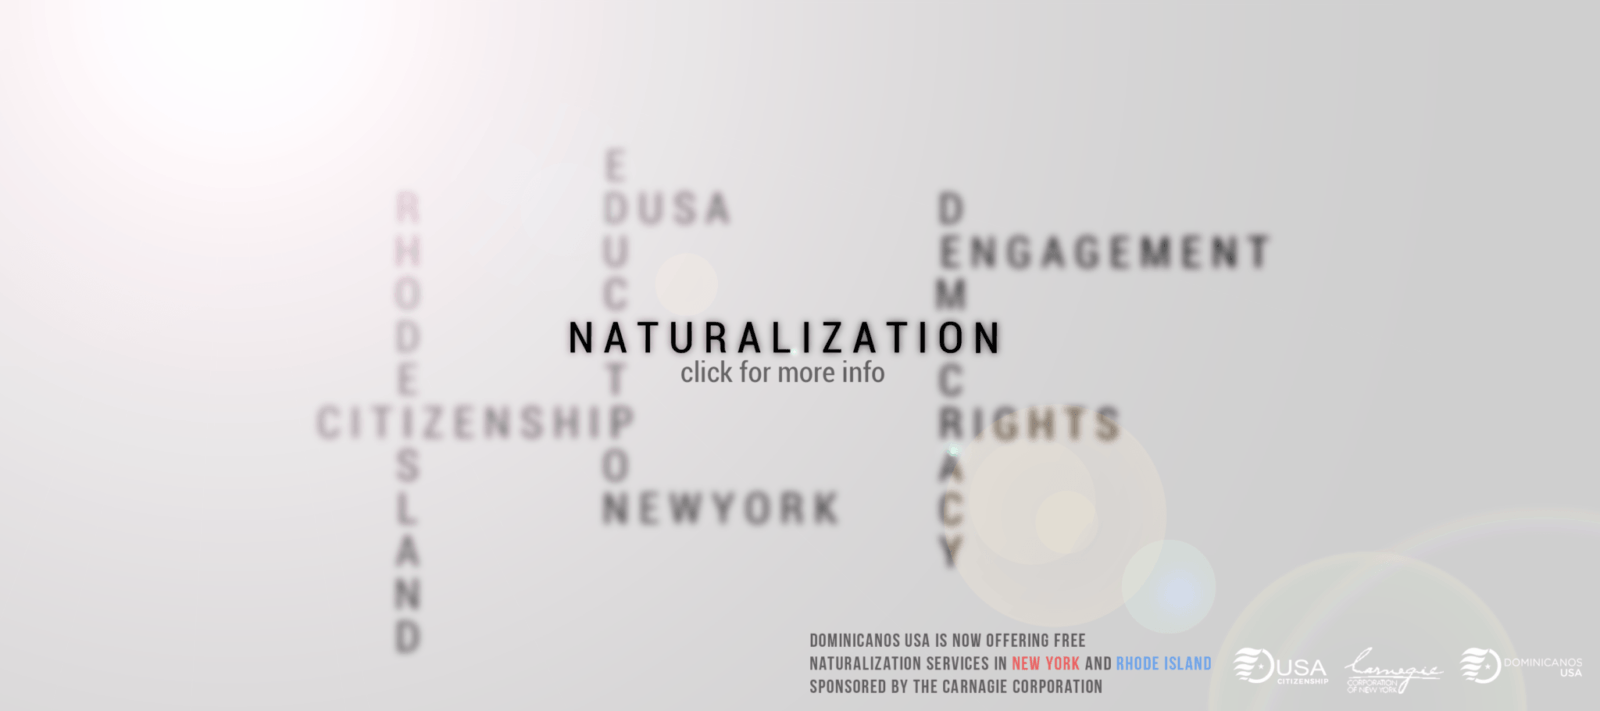 Introducing Our Newest Initiative: DUSA Citizenship